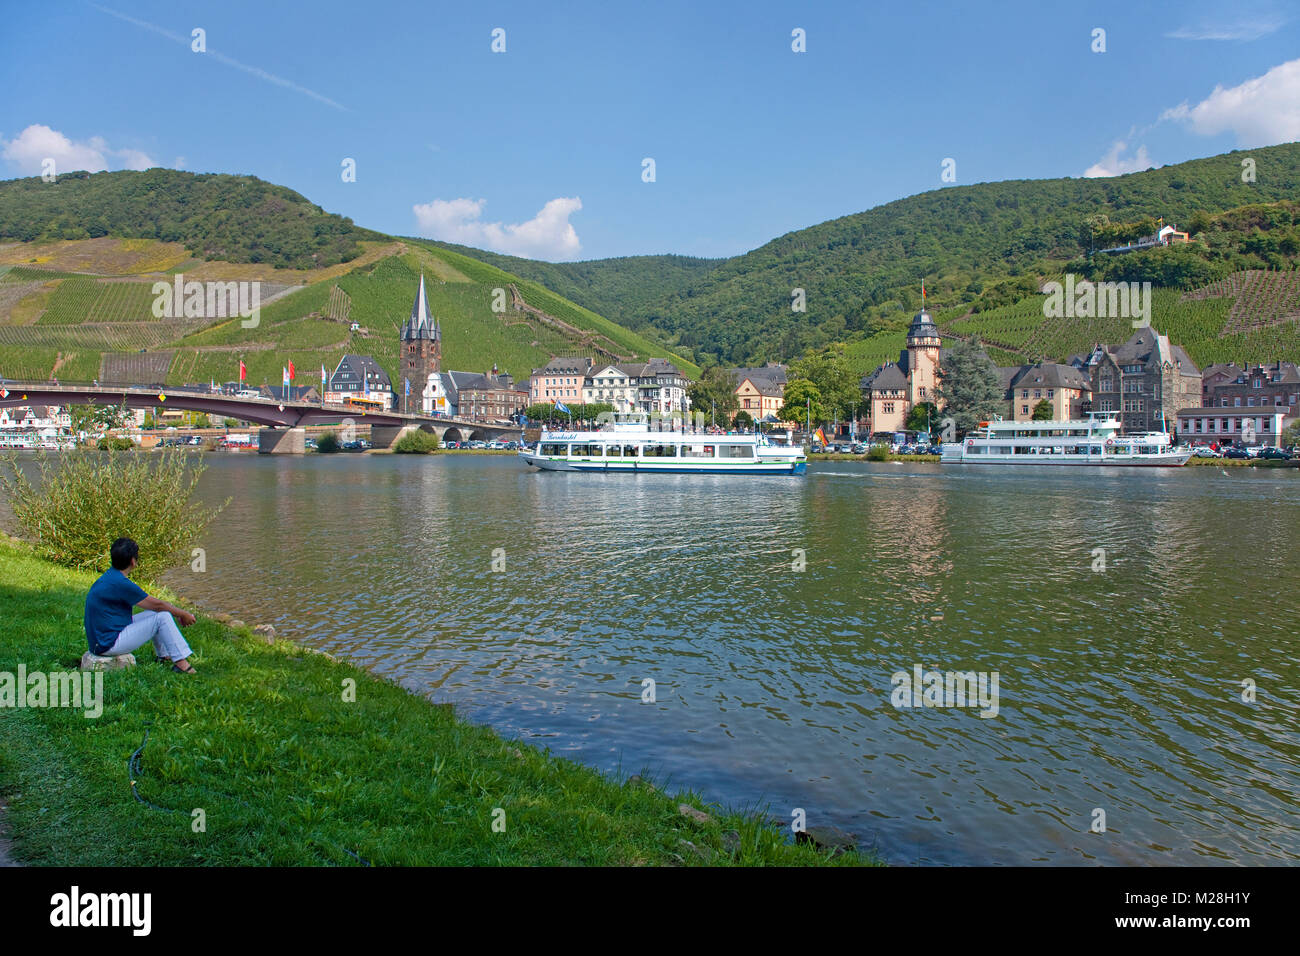 Woman sits at riverside and watch excursion ships on Moselle river, Bernkastel-Kues, Moselle river, Rhineland-Palatinate, Germany, Europe Stock Photo